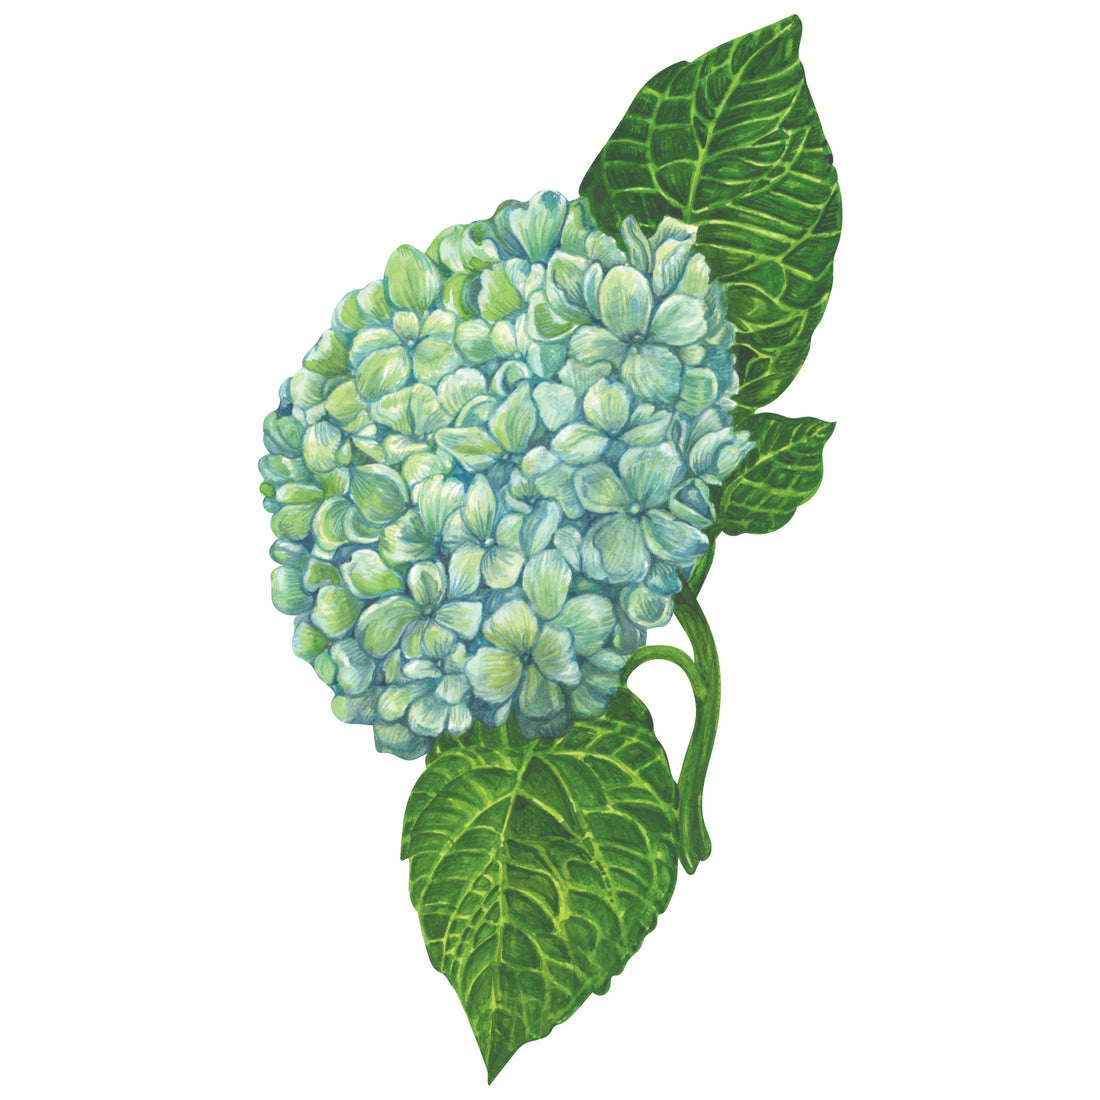 A die-cut illustration of blue and green hydrangea blossoms on a vibrant green stem and leaves.